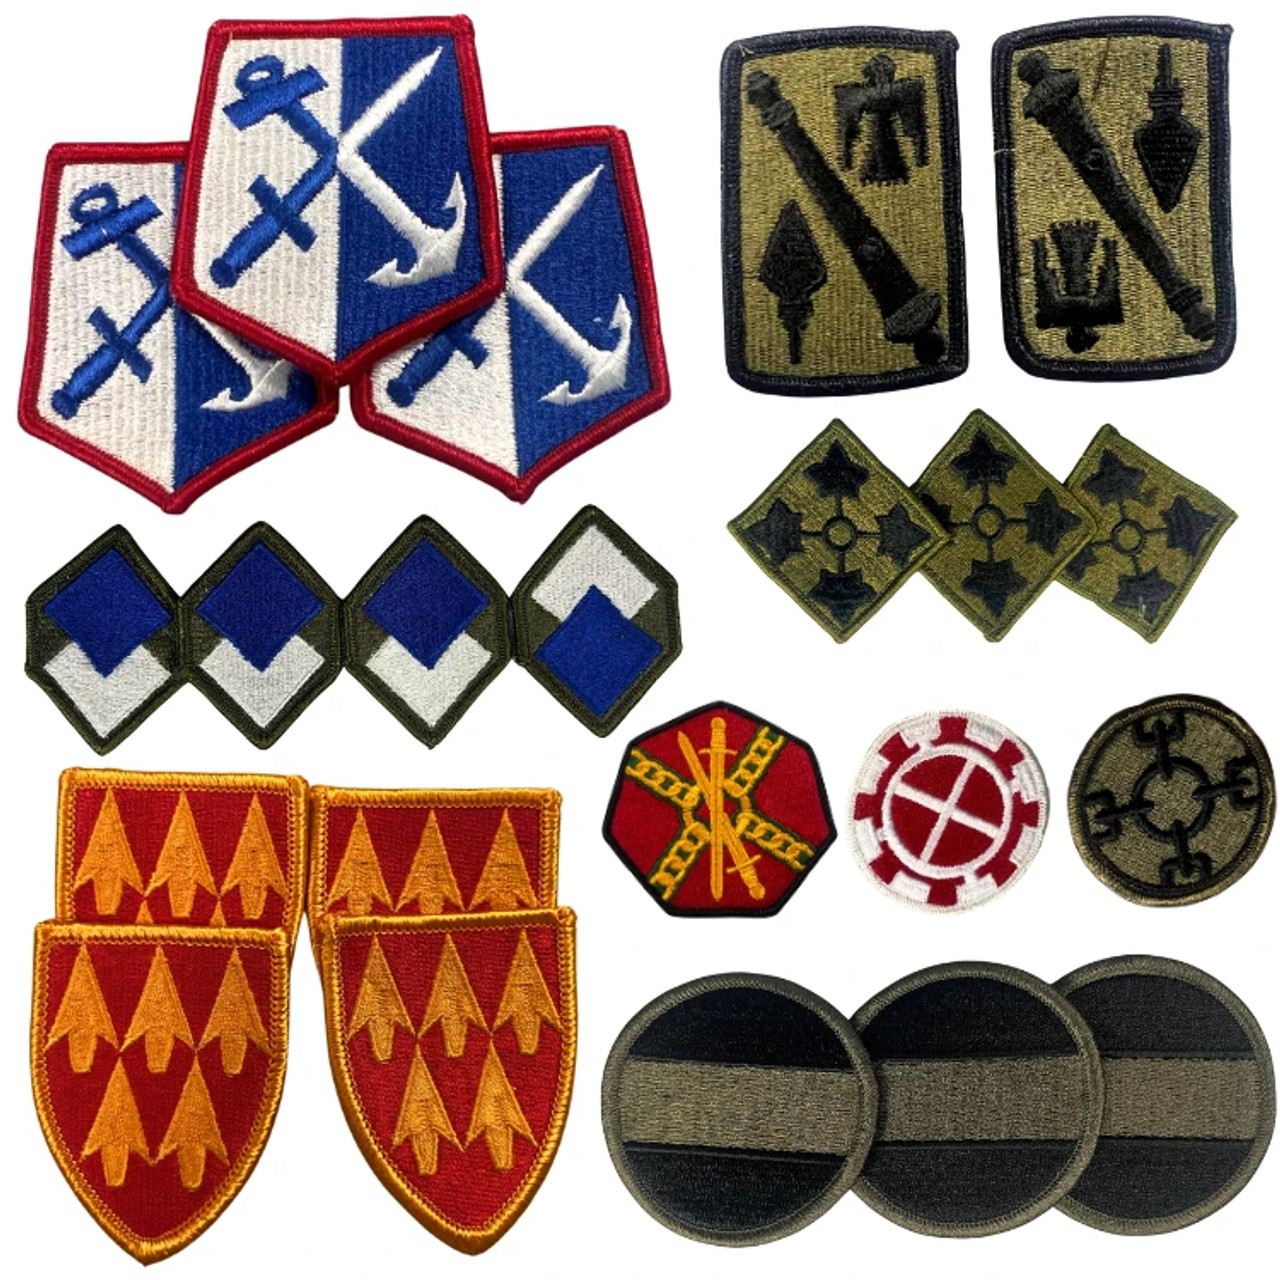 ASSORTED US ARMY INSIGNIA PATCHES